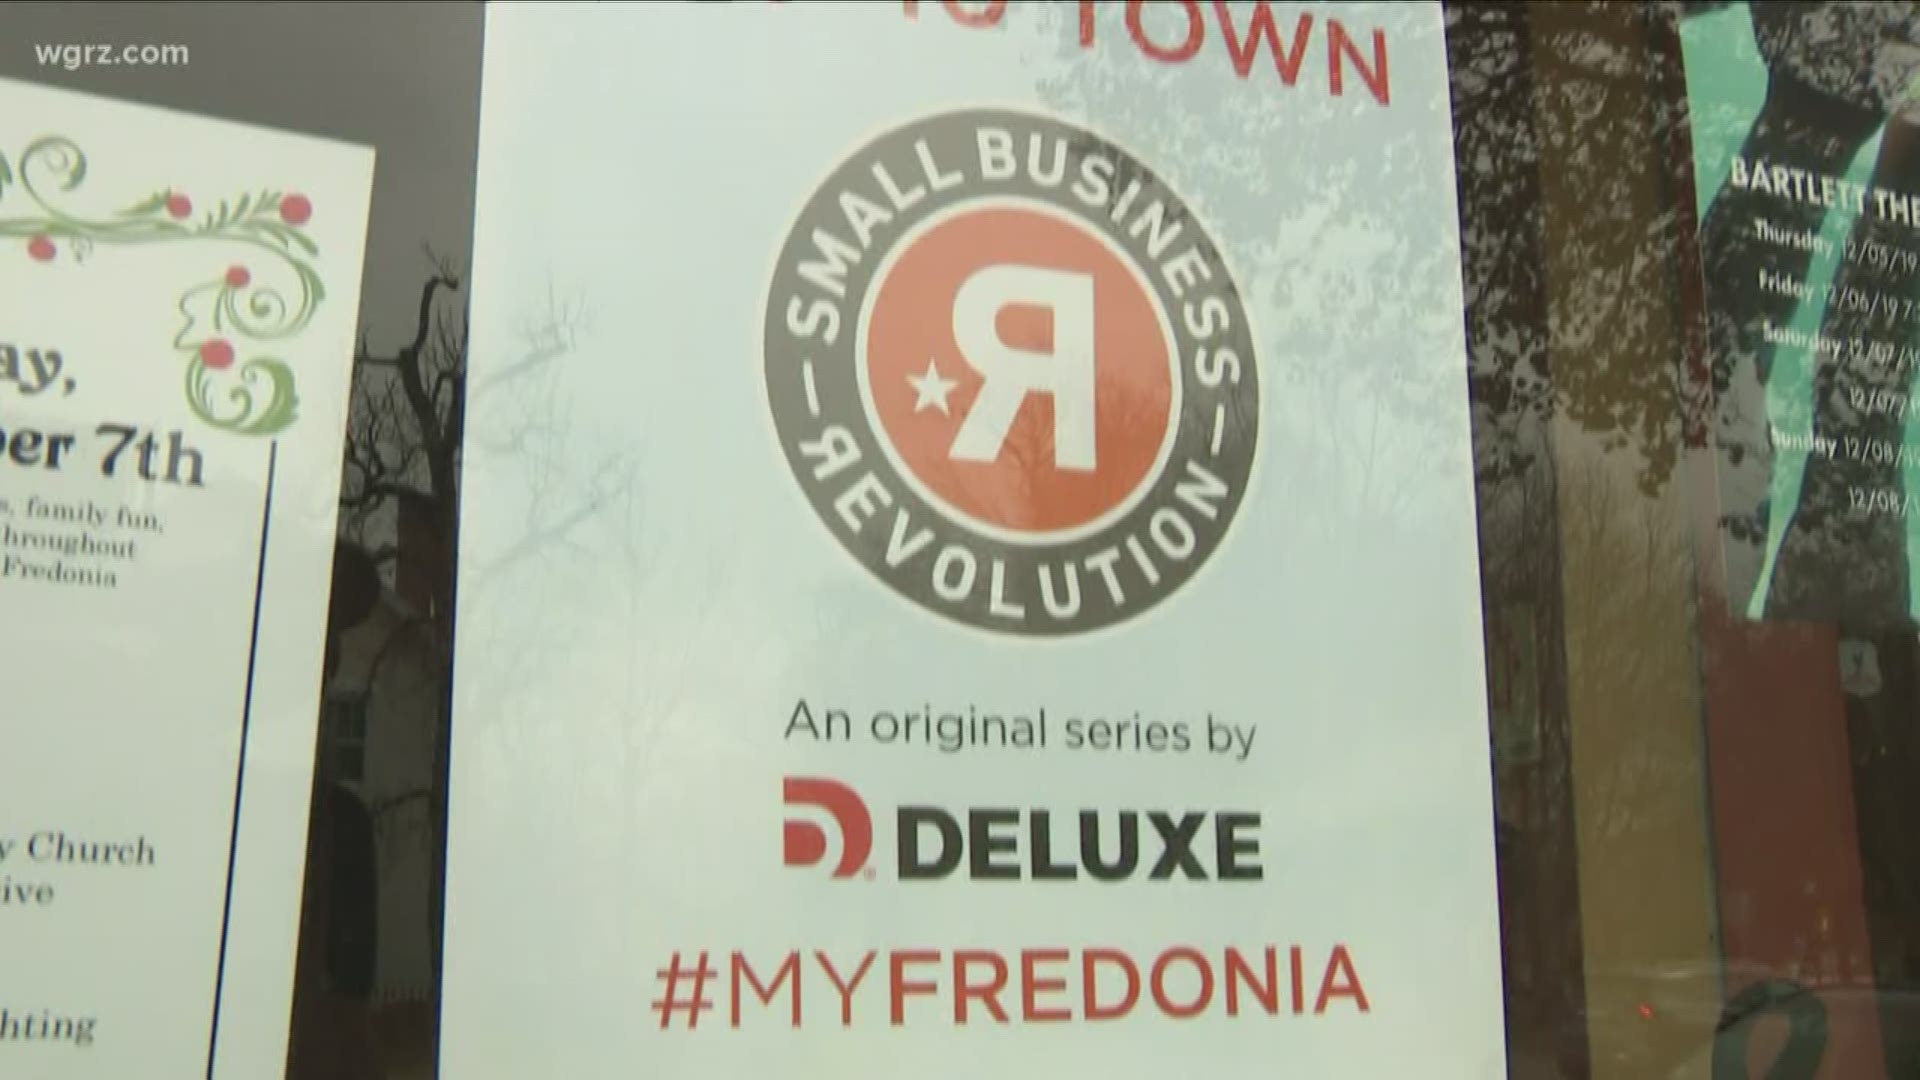 If Fredonia earns its place on the show, it could bring half a million dollars in economic development to the Western New York village.